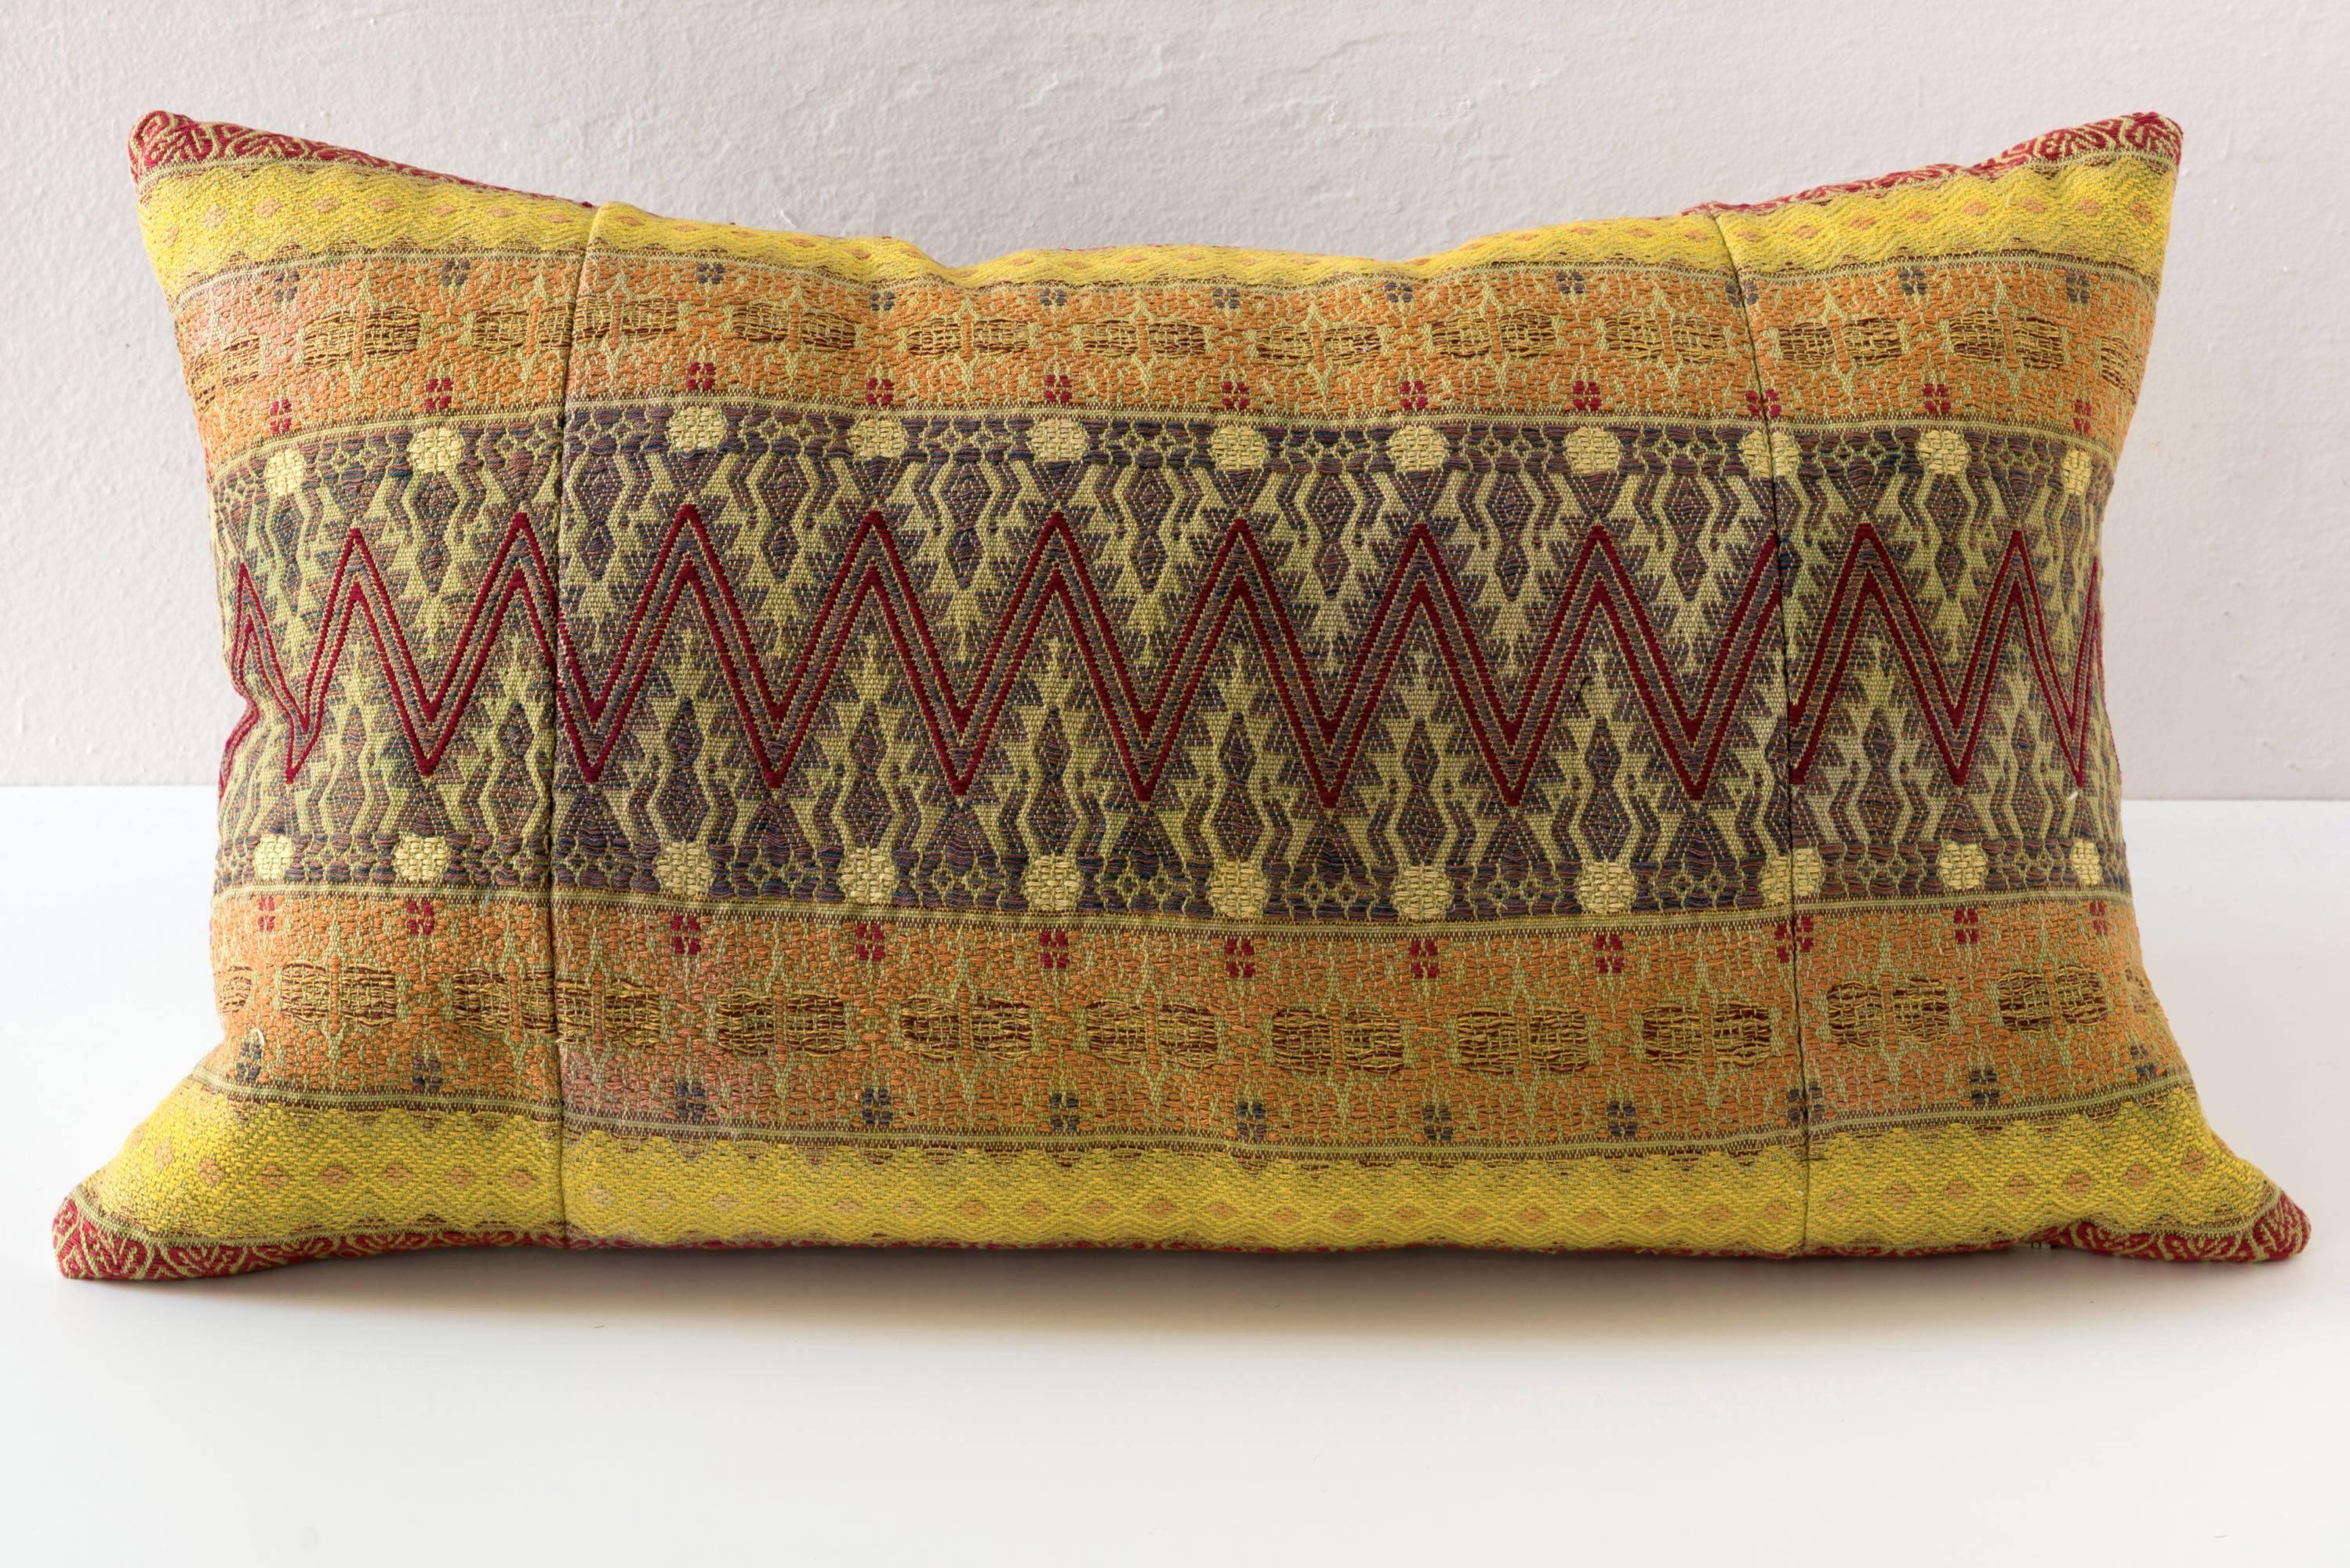 Hand-Woven Contemporary Artisan Hand-Loomed Pillows, Yellow Pumpkin Olive Maroon For Sale